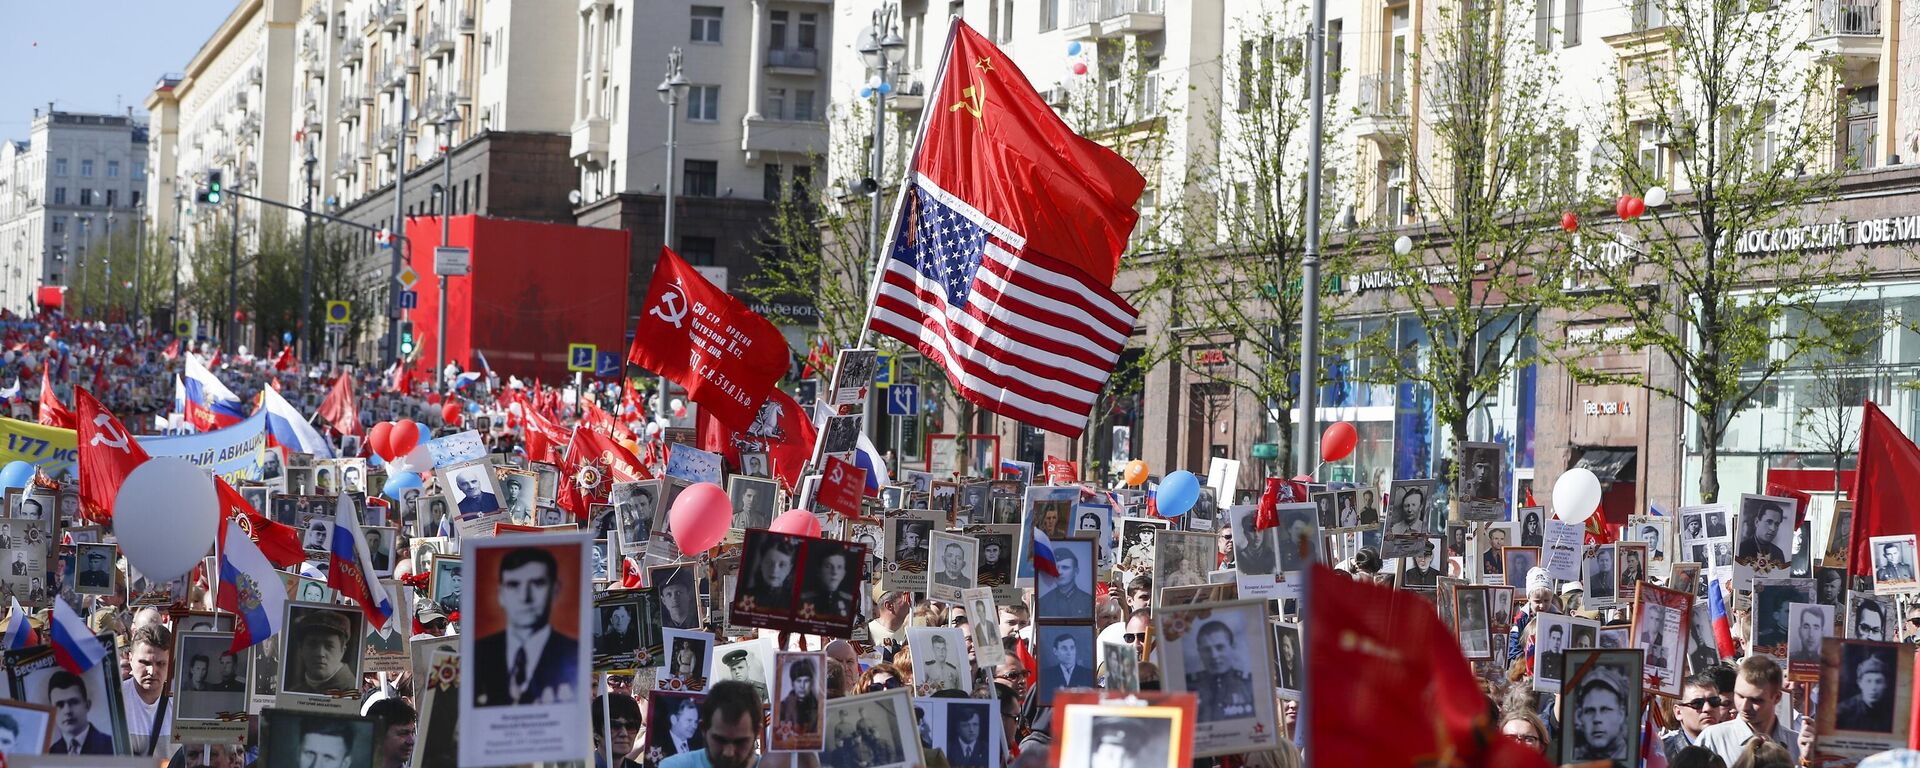 People carry portraits of relatives who fought in World War II, and Russian, U.S. national and Soviet flags, during the Immortal Regiment march along the Red Square in Moscow, Russia, Wednesday, May 9, 2018, celebrating 73 years since the end of WWII and the defeat of Nazi Germany. - Sputnik Africa, 1920, 09.05.2023